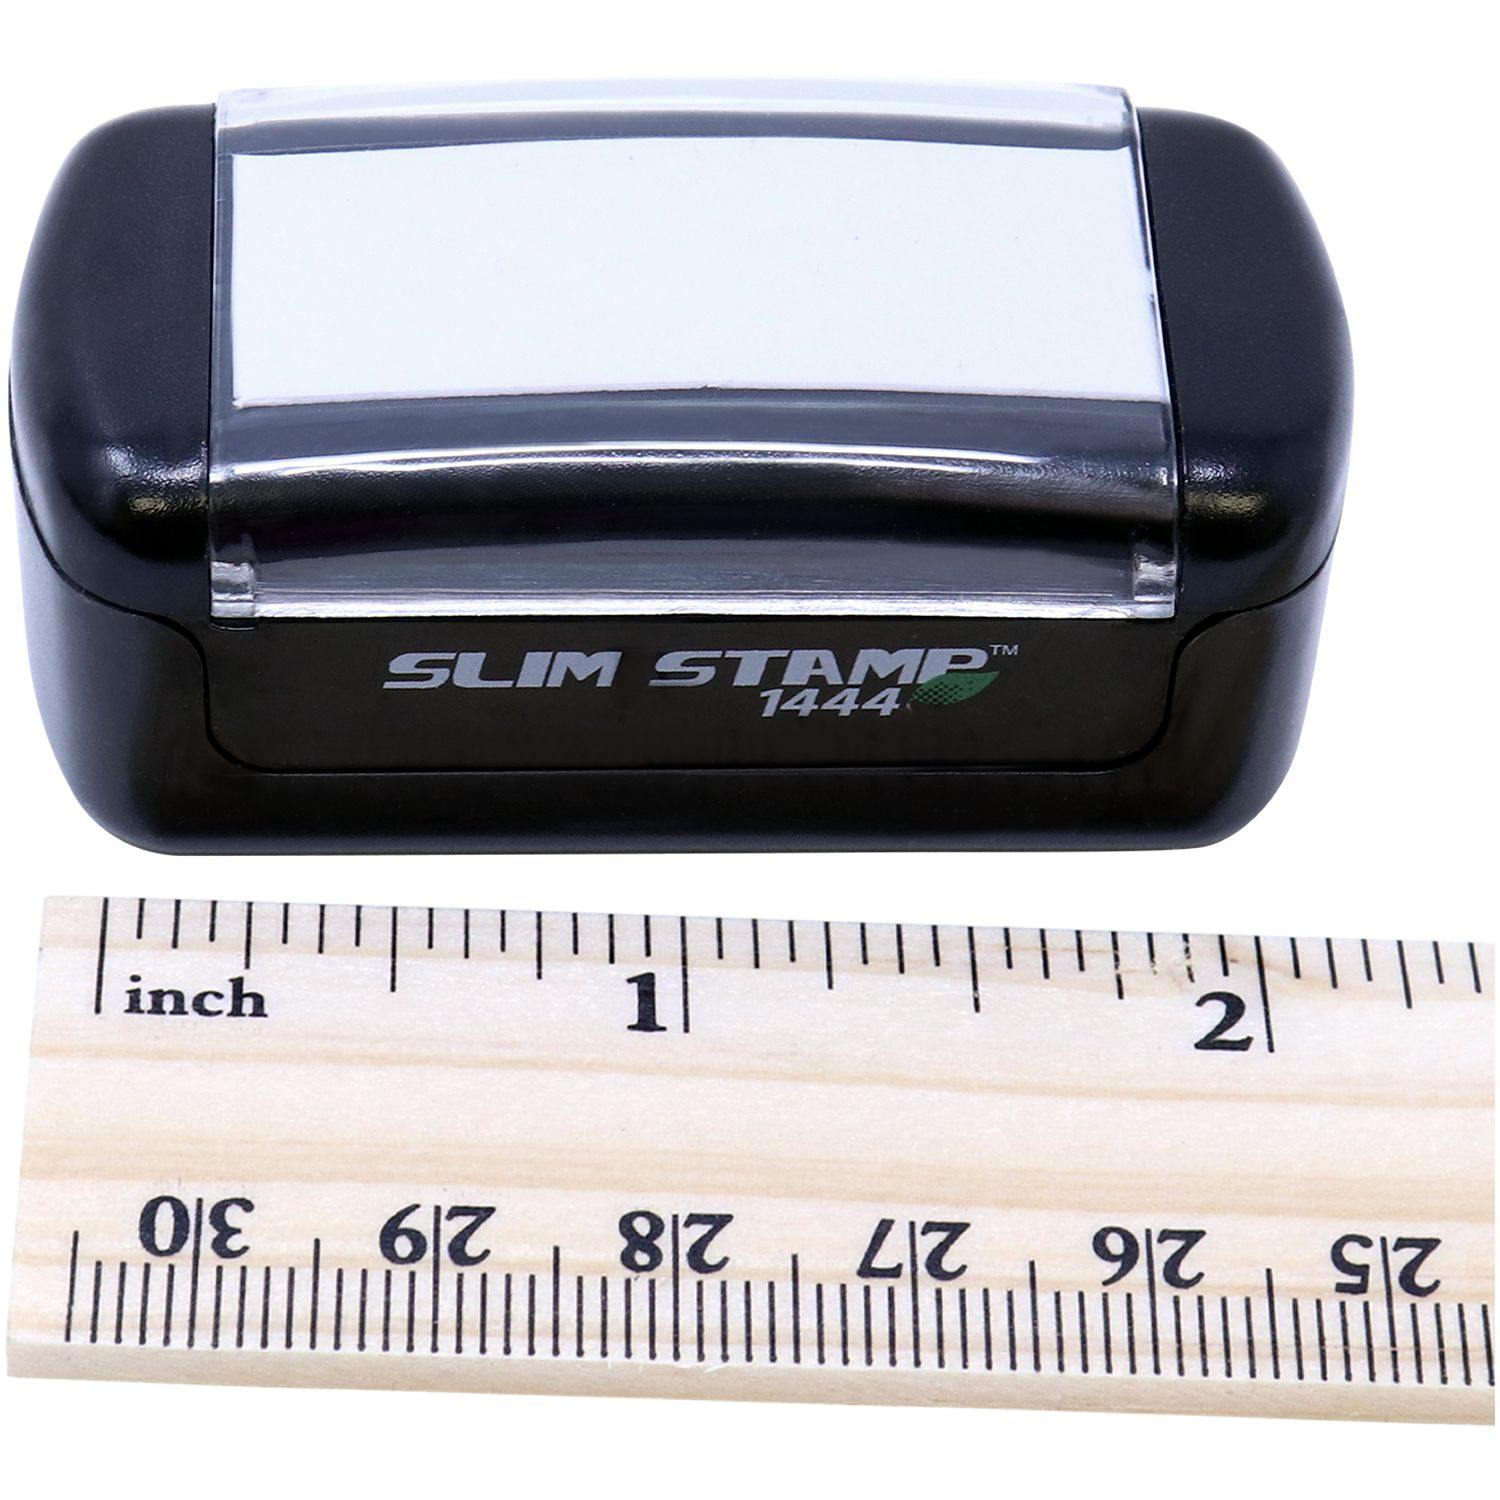 Measurement Slim Pre-Inked Narrow Font First Class Mail Stamp with Ruler